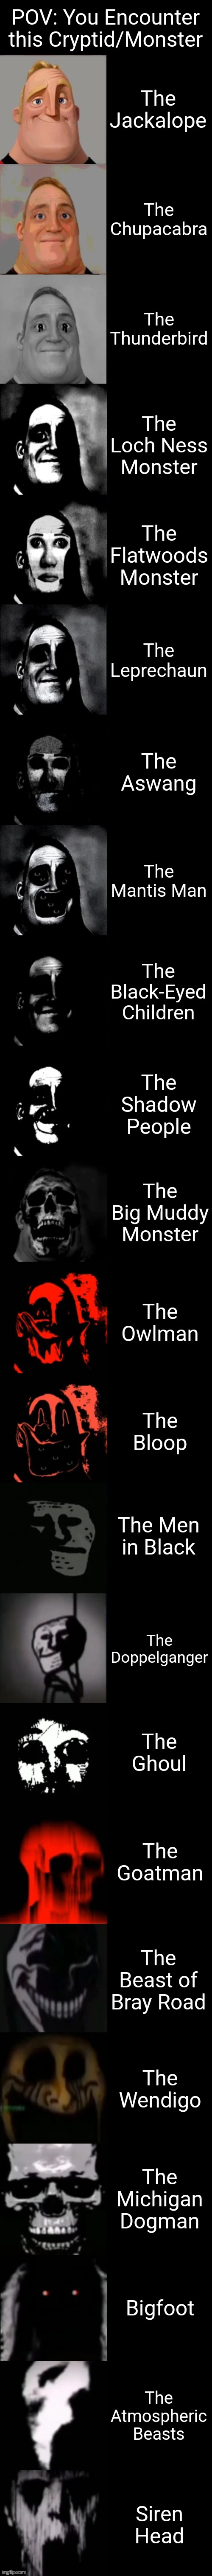 Credit to Emzium for the original meme on YouTube! | POV: You Encounter this Cryptid/Monster; The Jackalope; The Chupacabra; The Thunderbird; The Loch Ness Monster; The Flatwoods Monster; The Leprechaun; The Aswang; The Mantis Man; The Black-Eyed Children; The Shadow People; The Big Muddy Monster; The Owlman; The Bloop; The Men in Black; The Doppelganger; The Ghoul; The Goatman; The Beast of Bray Road; The Wendigo; The Michigan Dogman; Bigfoot; The Atmospheric Beasts; Siren Head | image tagged in mr incredible becoming uncanny extended hd | made w/ Imgflip meme maker